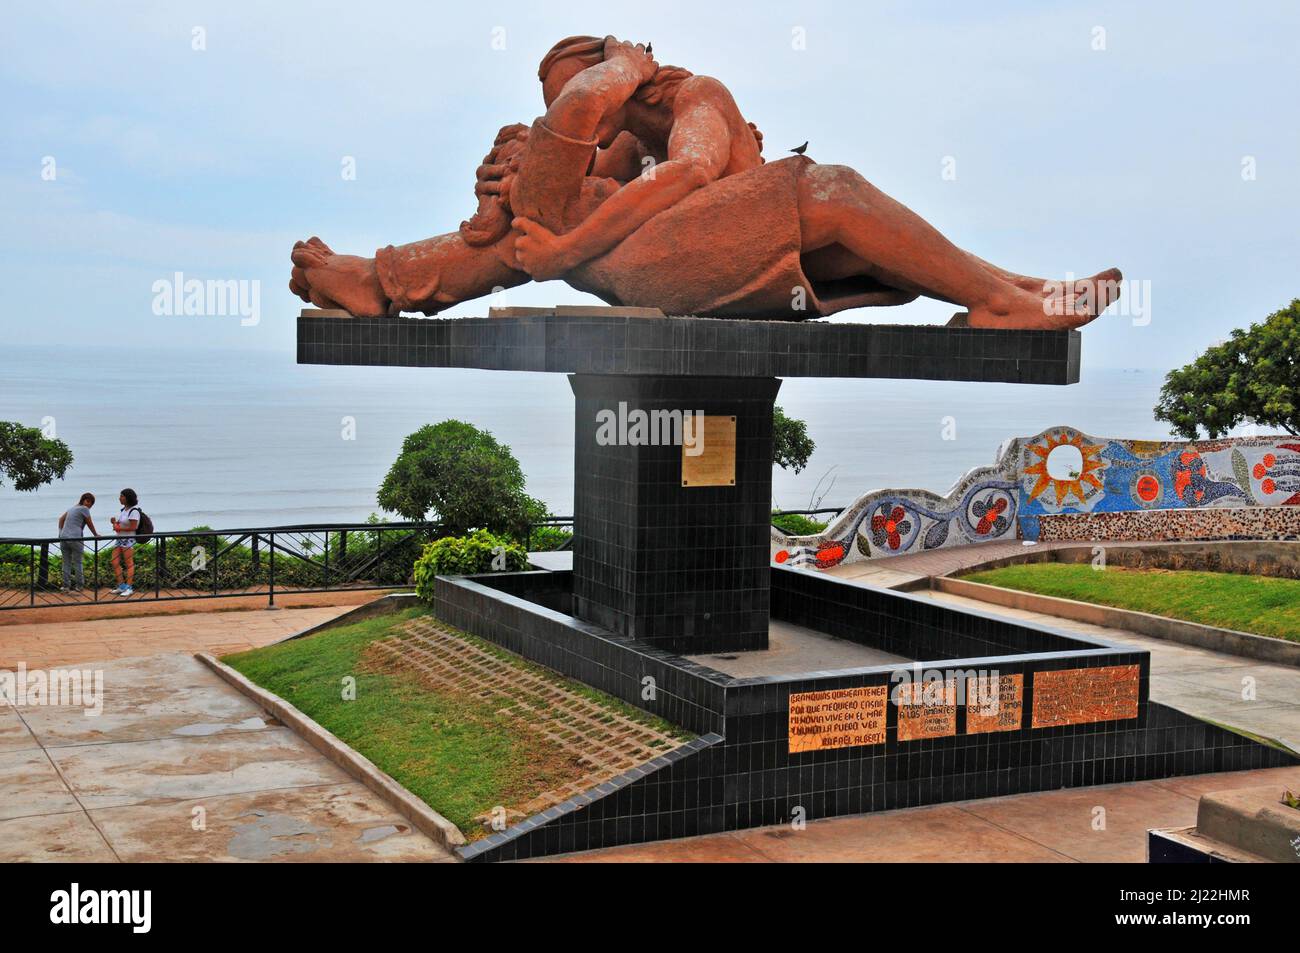 the statue 'El Beso' (The Kiss) from Victor Delfín in the love park, Miraflores, Lima, Peru Stock Photo